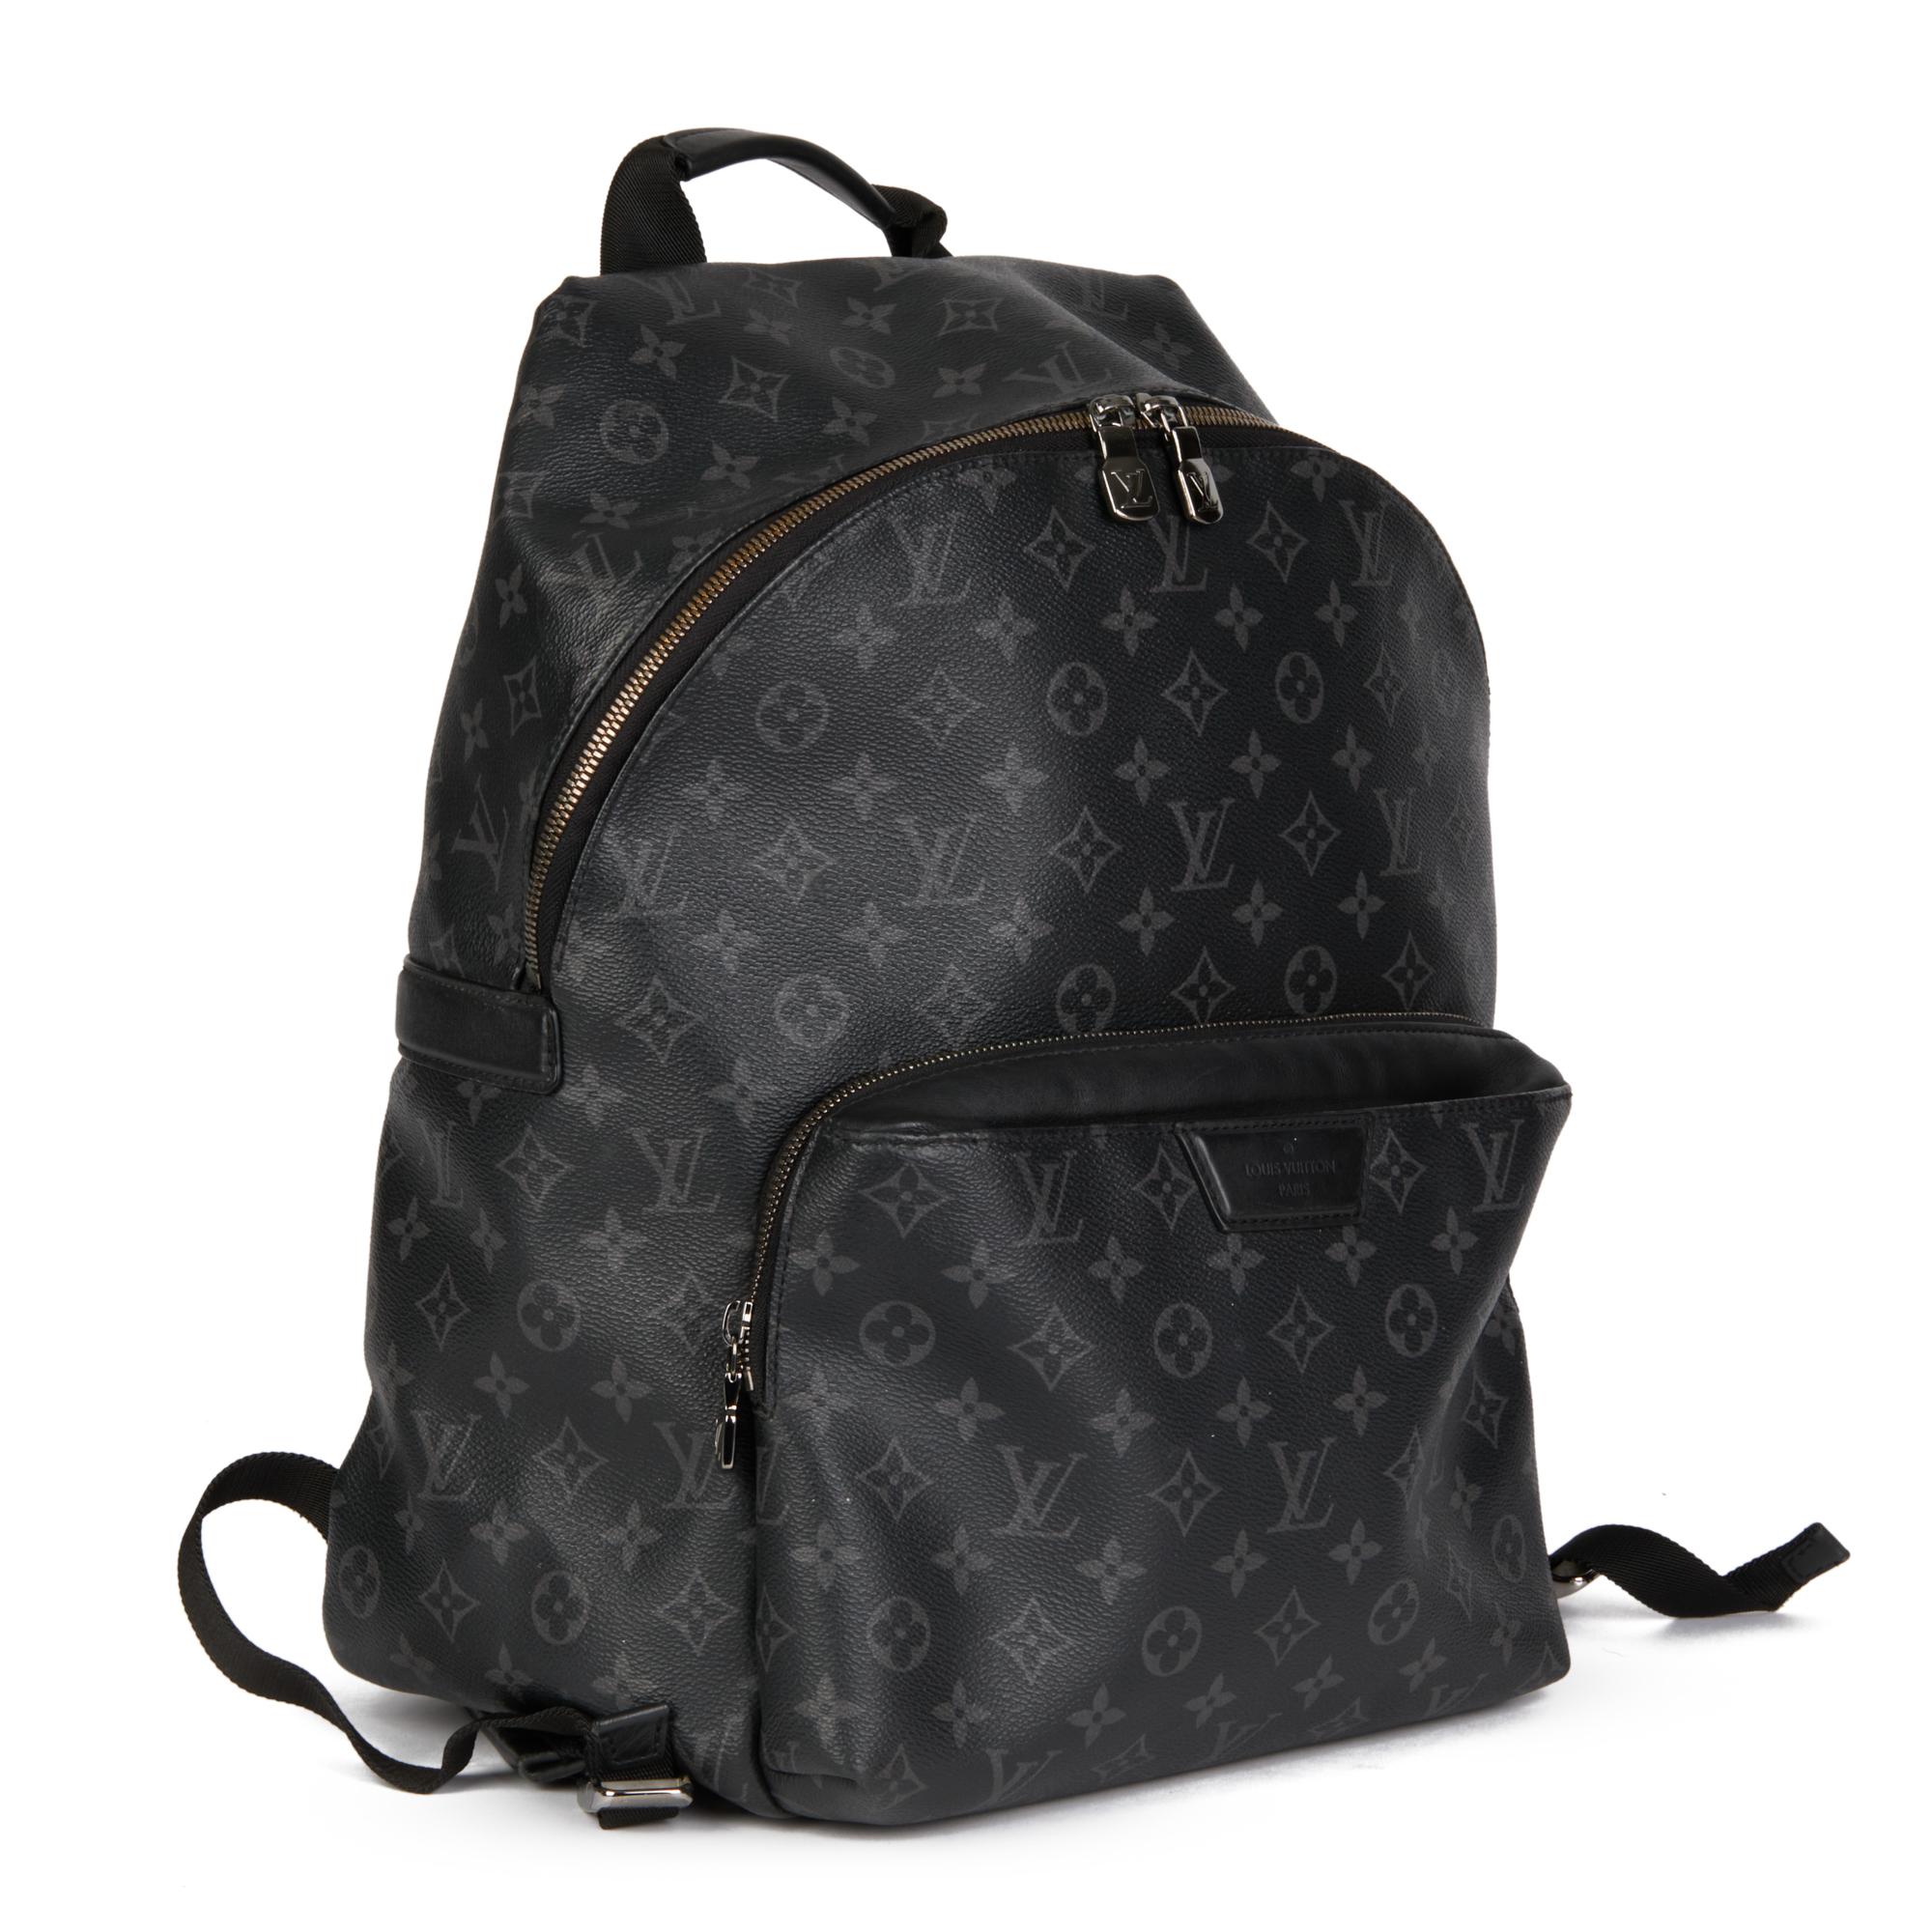 LOUIS VUITTON
Graphite Monogram Eclipse Coated Canvas & Black Calfskin Leather Discovery Backpack

Xupes Reference: CB641
Serial Number: TJ2148
Age (Circa): 2018
Authenticity Details: Date Stamp (Made in France)
Gender: Gents
Type: Backpack

Colour: